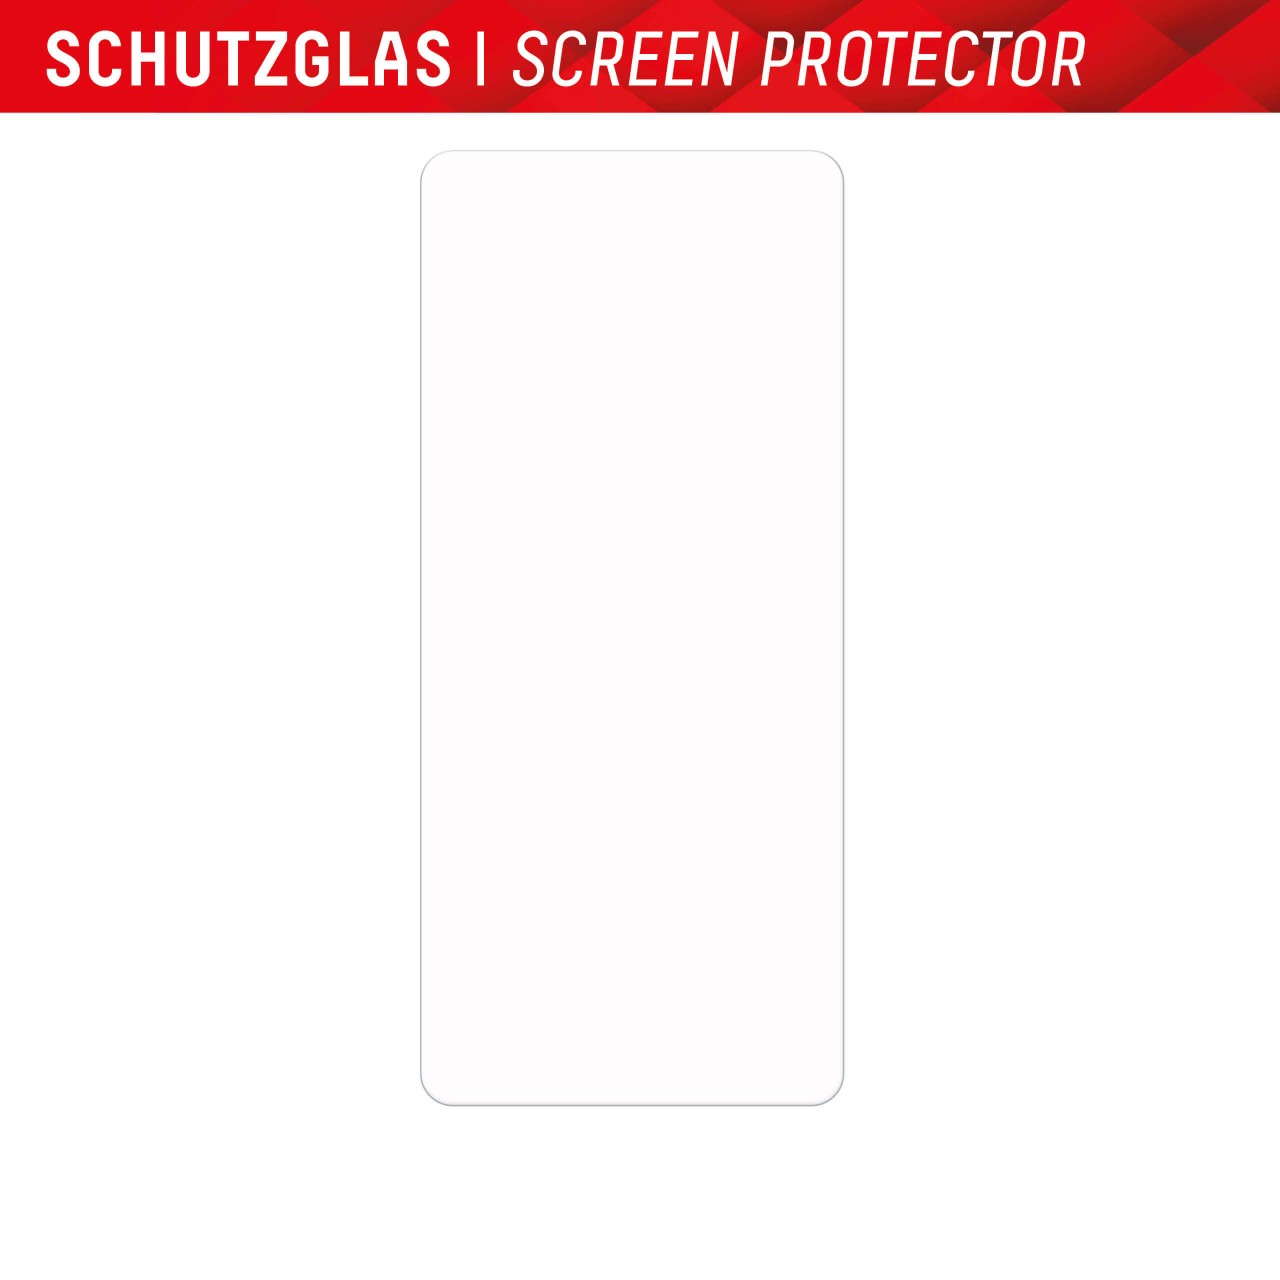 Real Glass for Samsung Galaxy A71 (6,7"), 2D